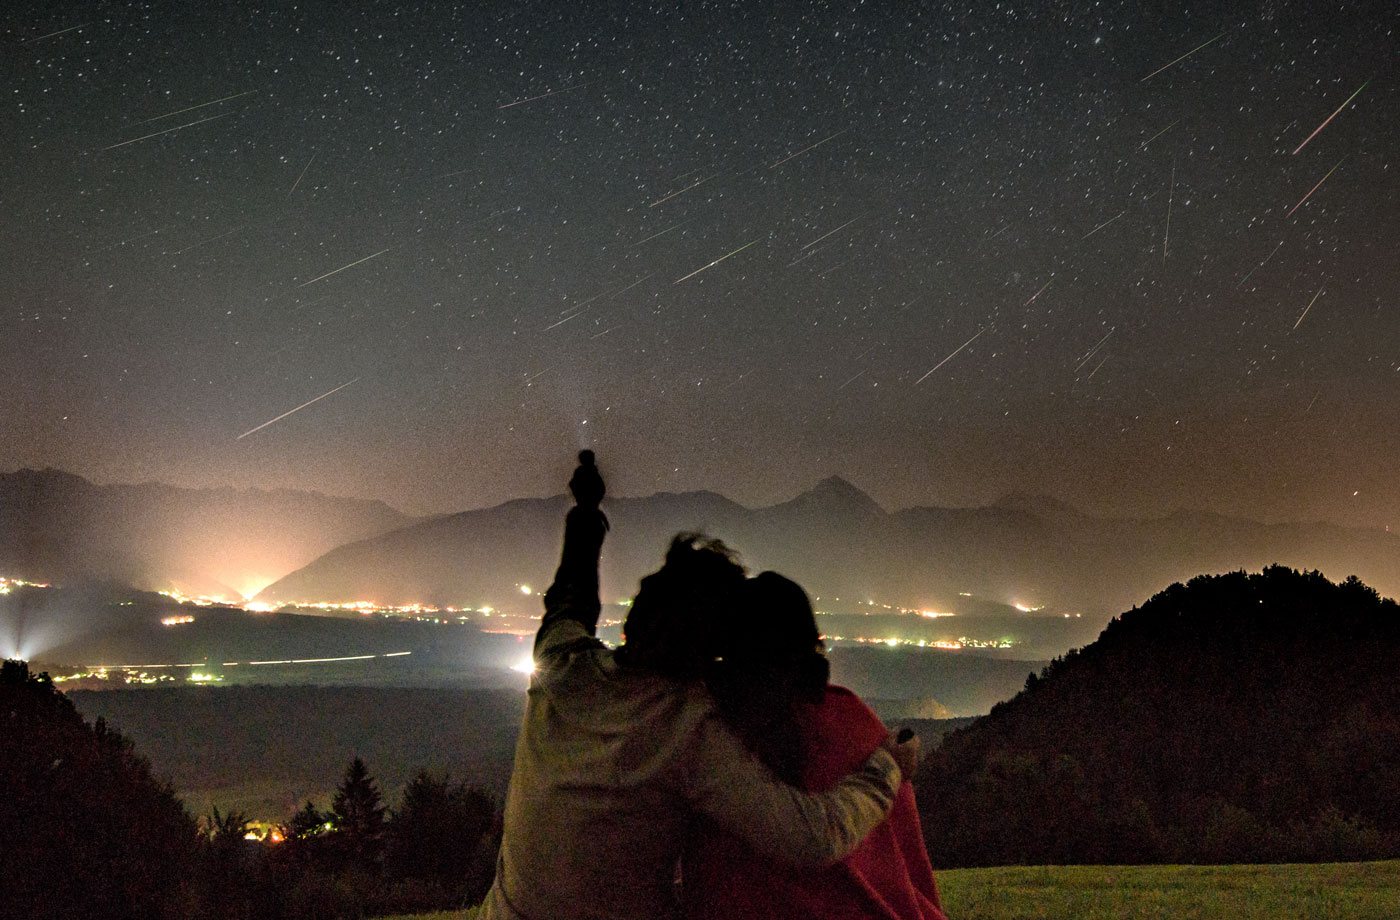 Here's what the Geminid meteor shower means for your horoscope